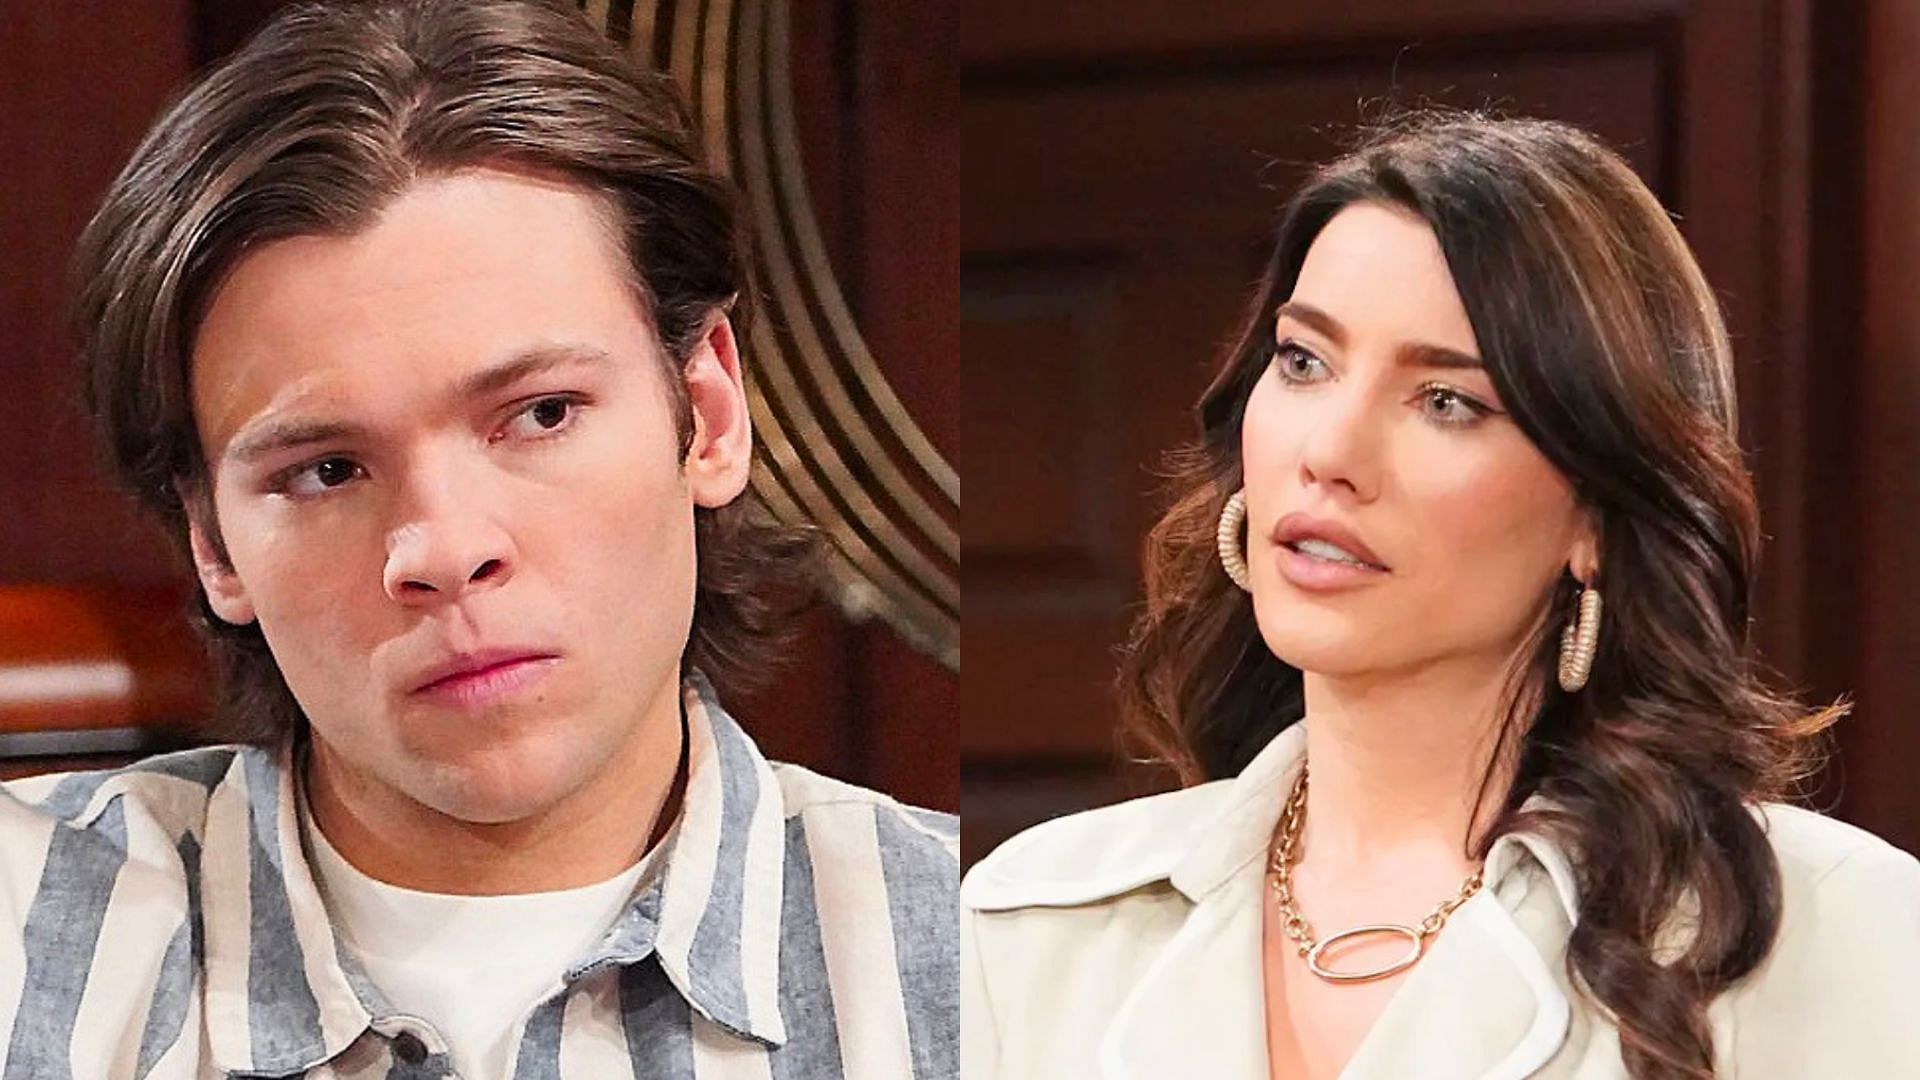 (L) Ridge &quot;RJ&quot; Forrester Jr. and (R) Steffy Forrester on the show (Image via CBS)